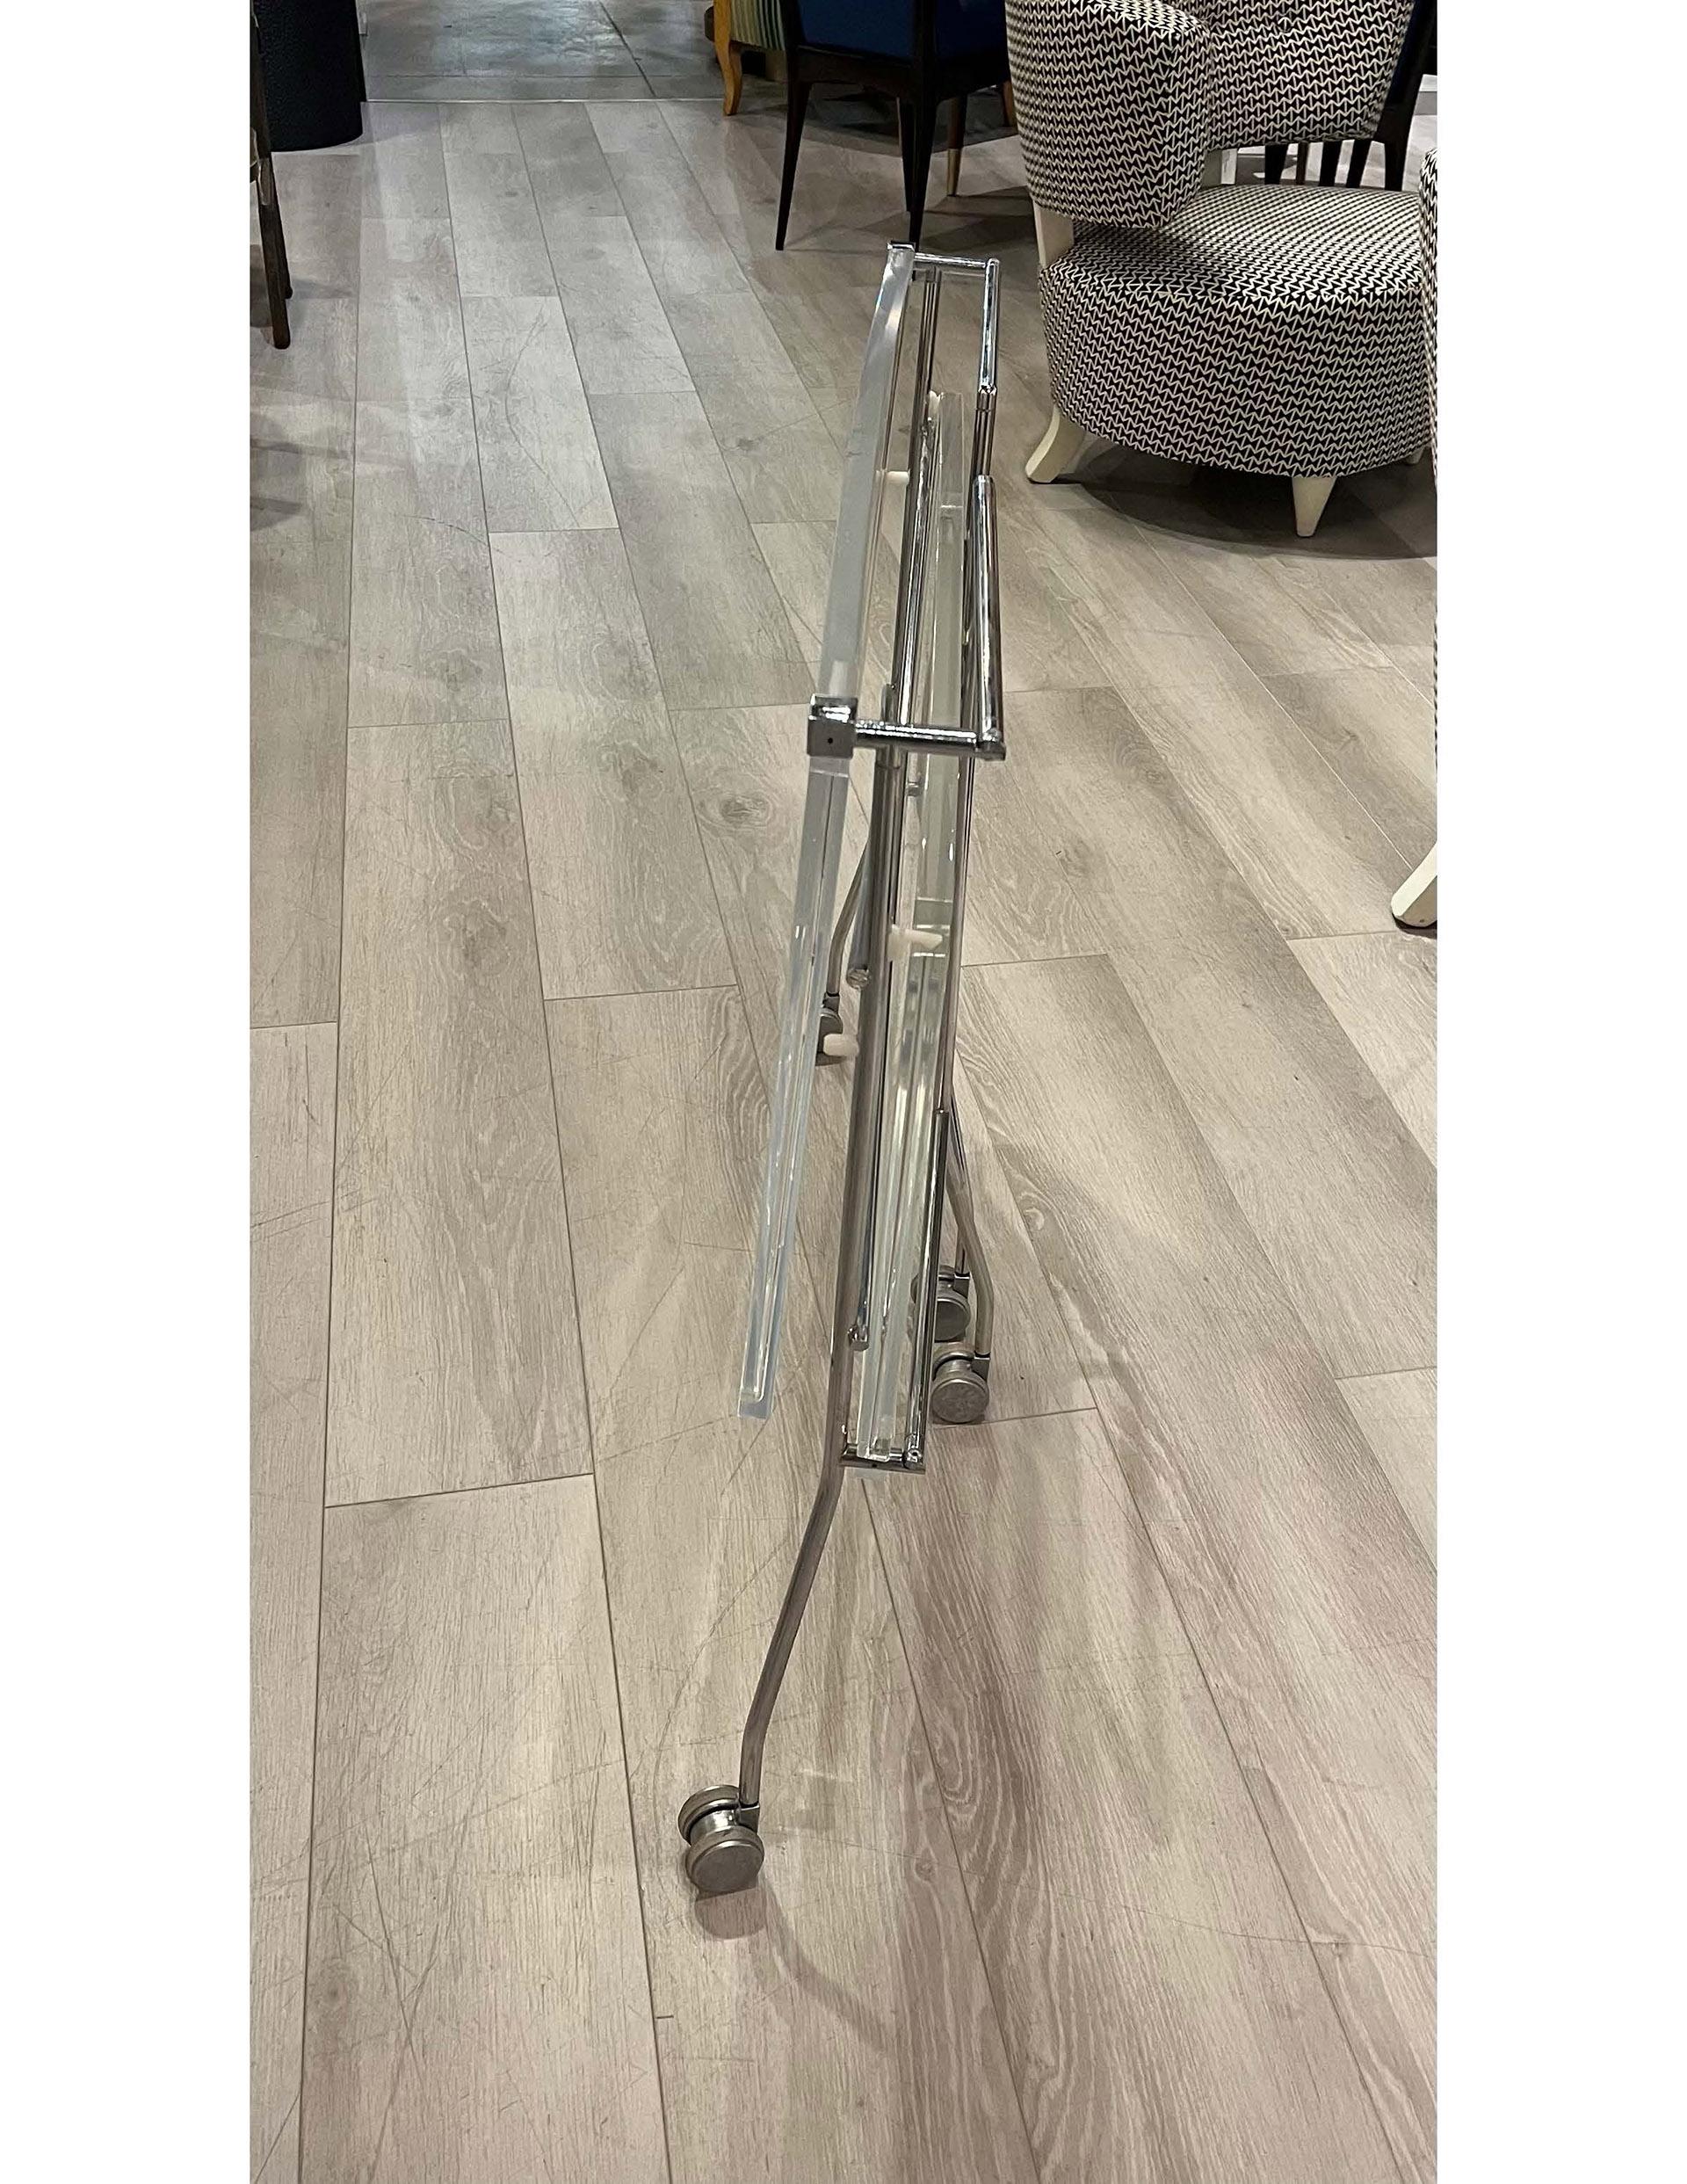 Flip Folding Trolley Table by A. Citterio with Toan Nguyen for Kartell For Sale 2